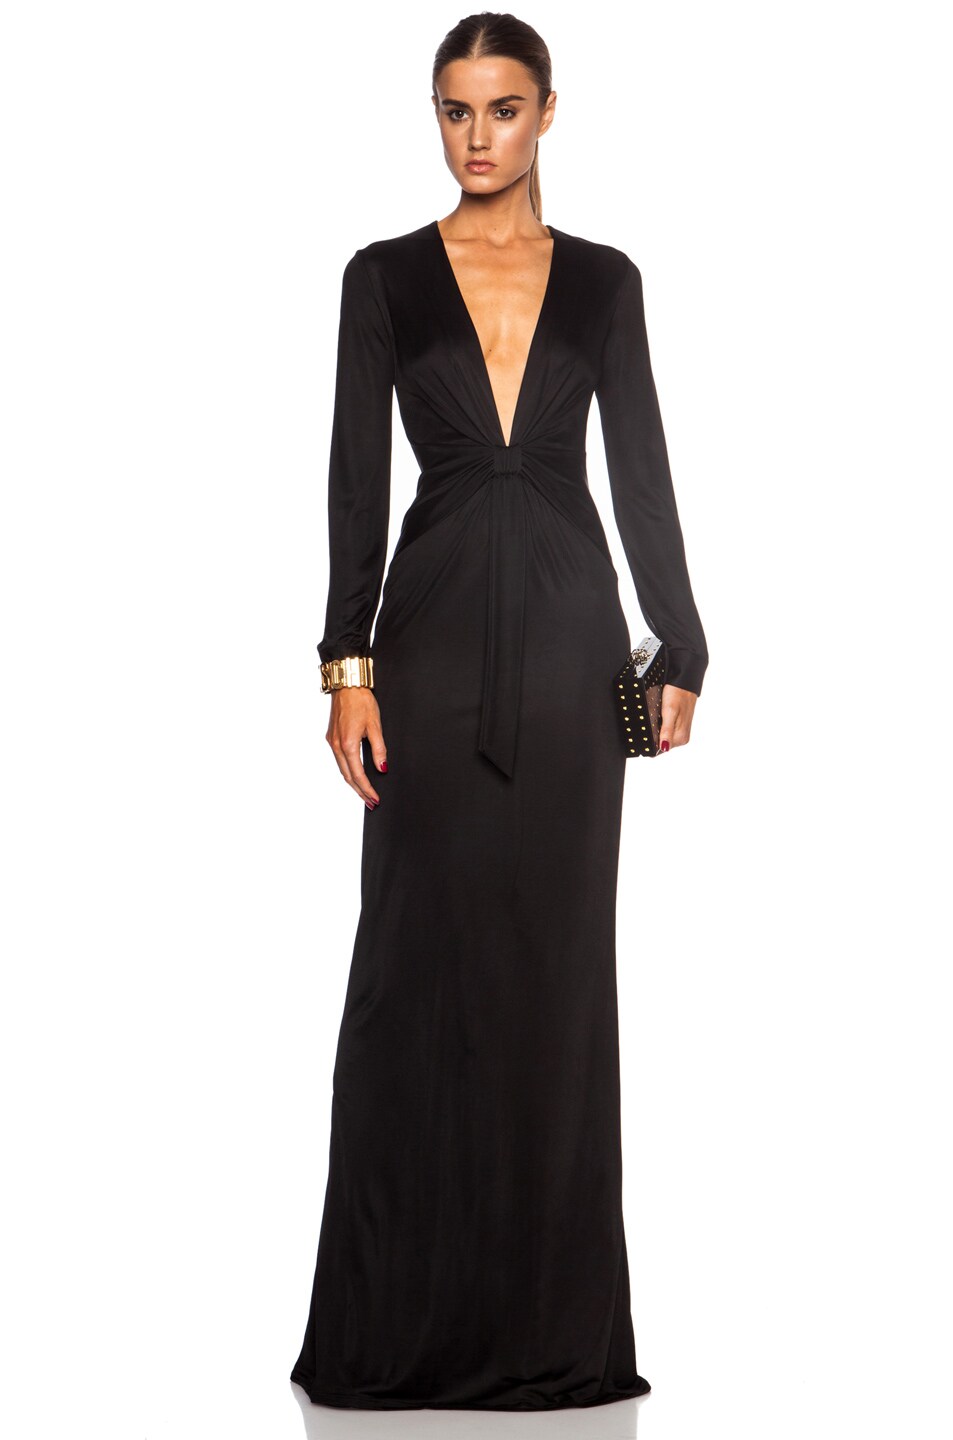 Moschino Long Sleeve Rayon-Blend Column Gown in Black | FWRD